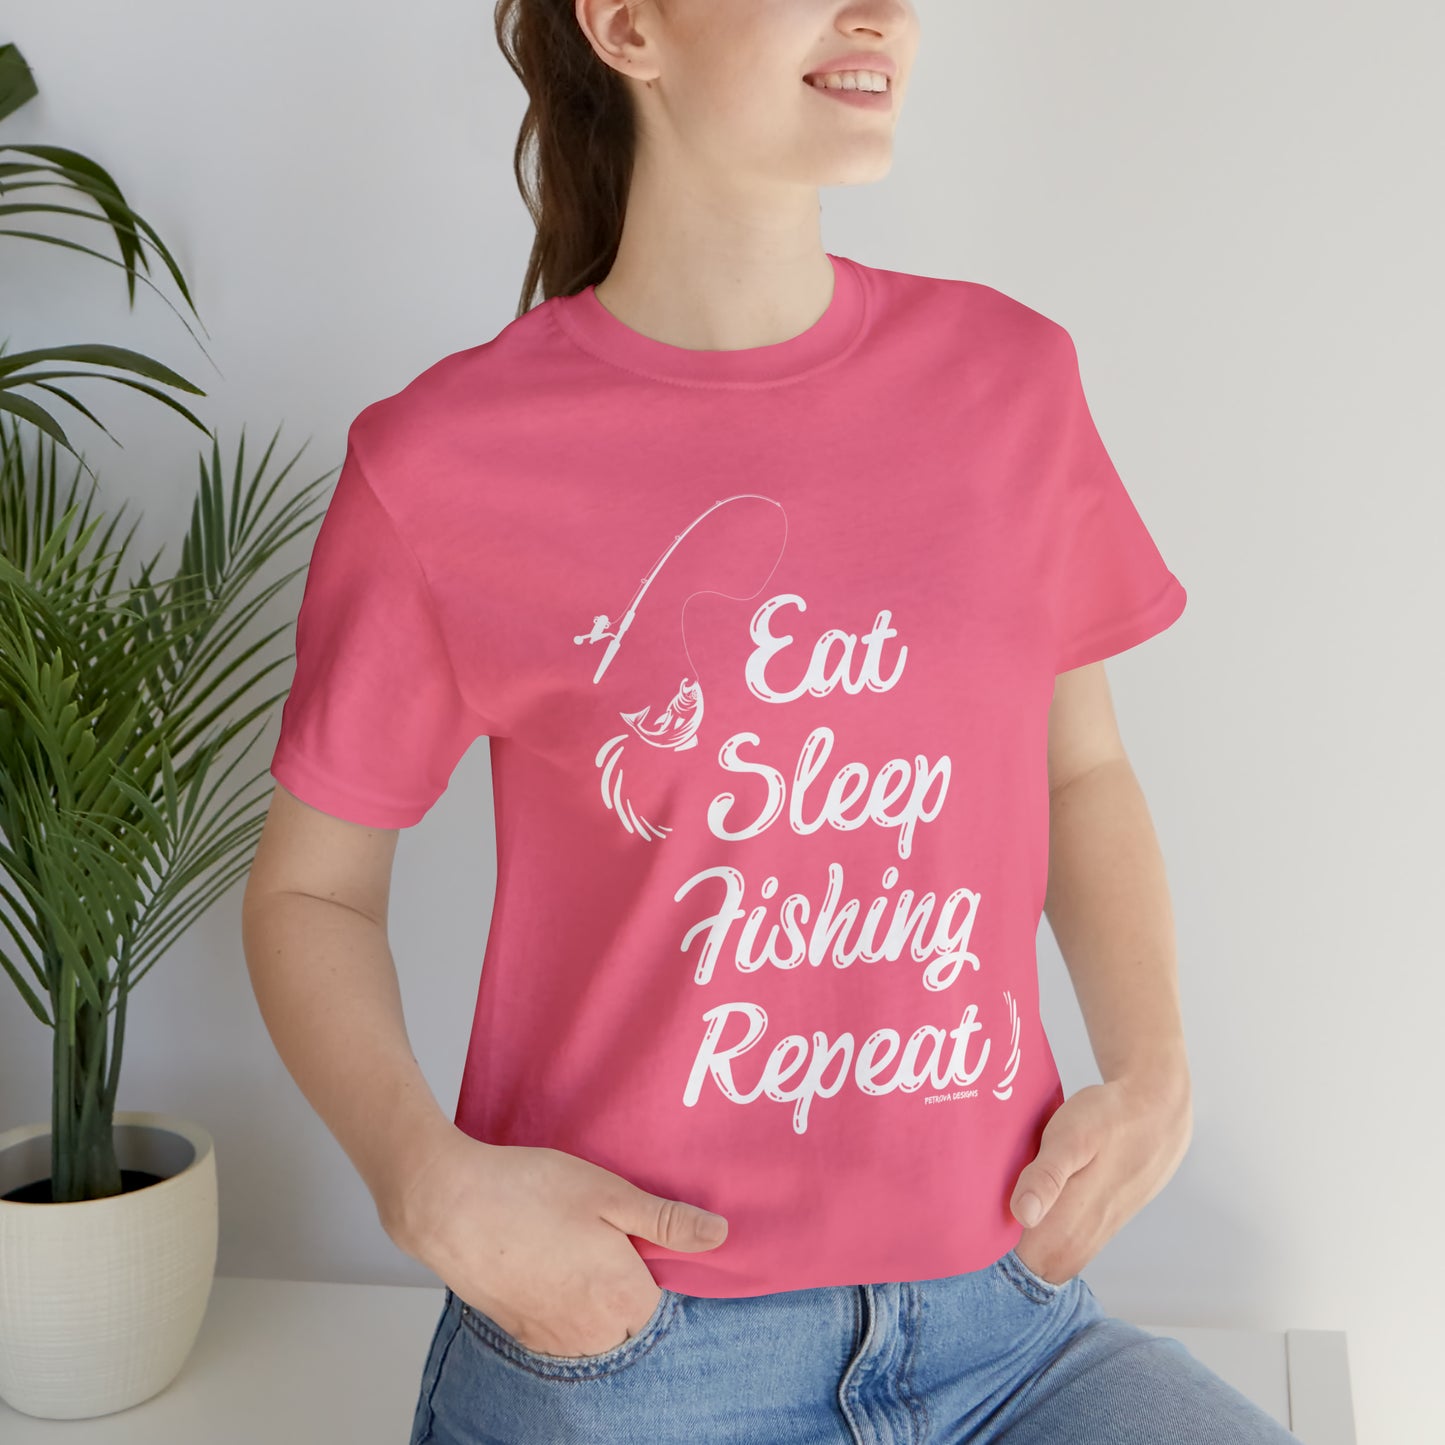 Charity Pink T-Shirt Tshirt Design Gift for Friend and Family Short Sleeved Shirt Fishing Hobby Aesthetic Petrova Designs